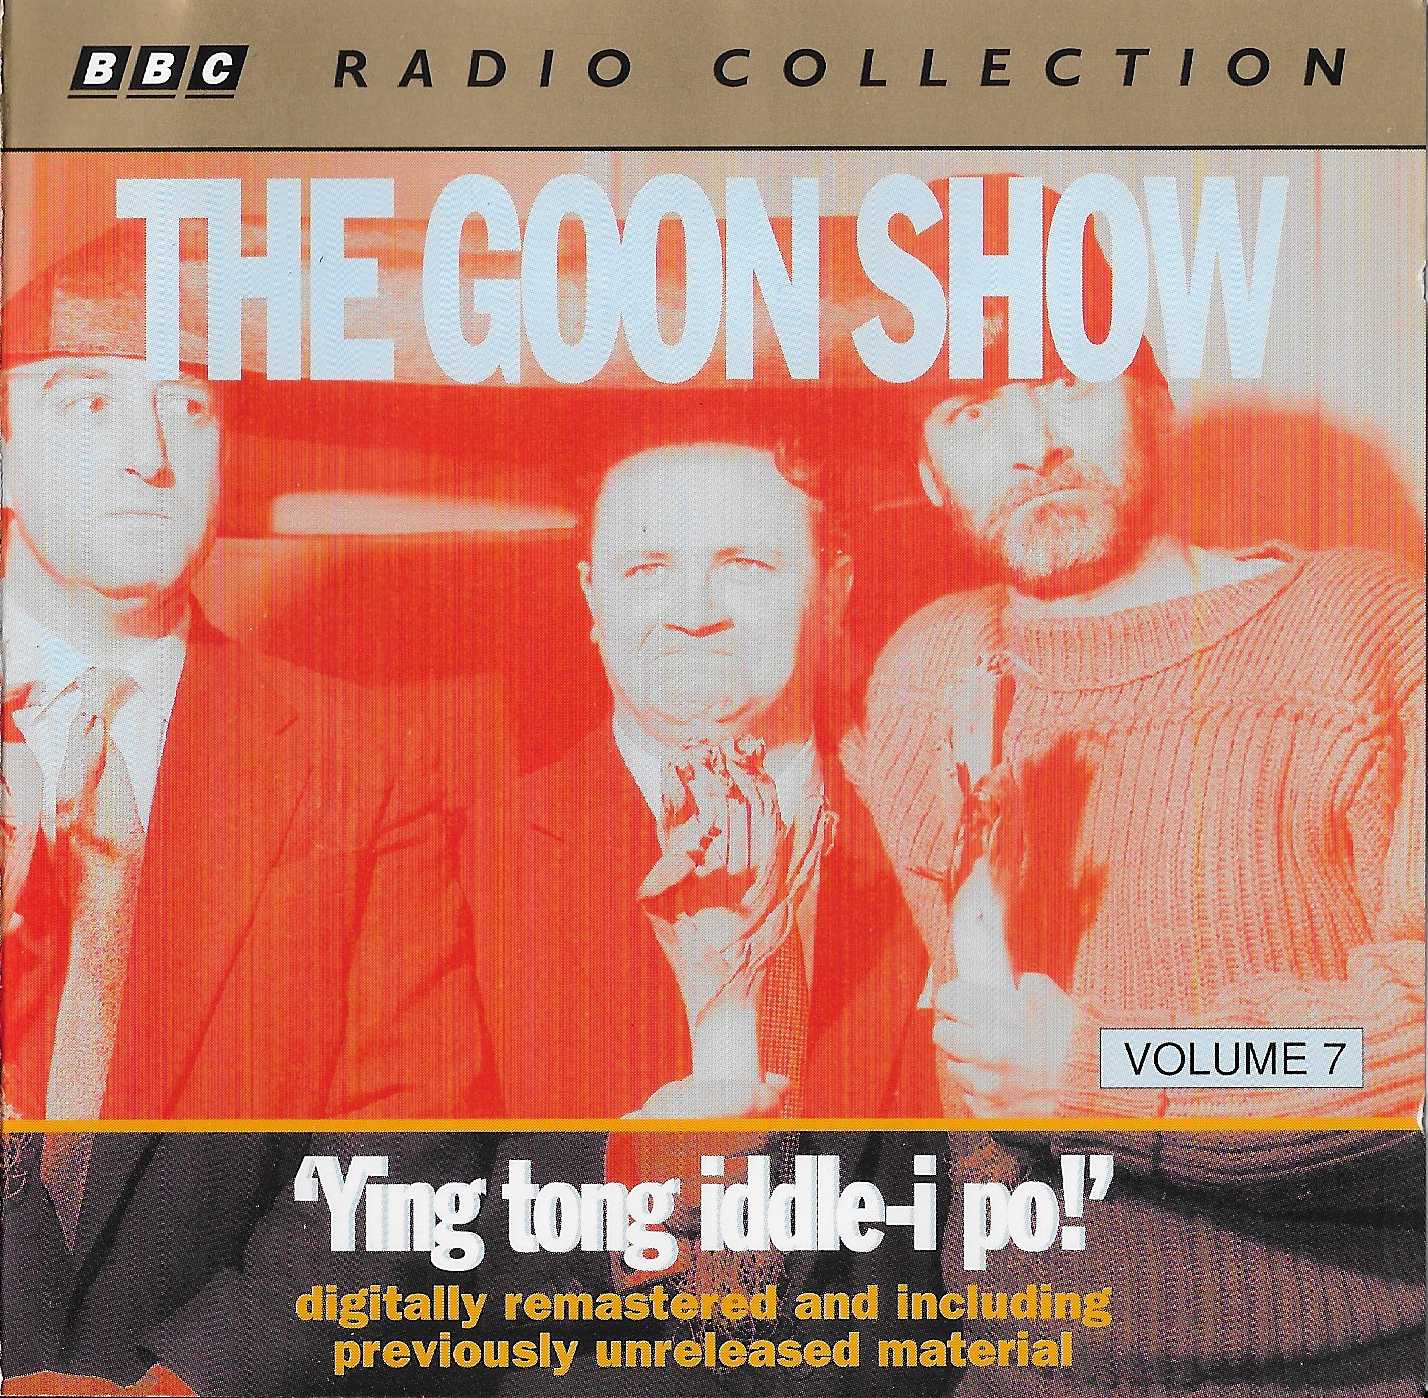 Picture of ZBBC 1870 CD The Goon show 7 - Ying tong iddle-i po! by artist Spike Milligan from the BBC cds - Records and Tapes library